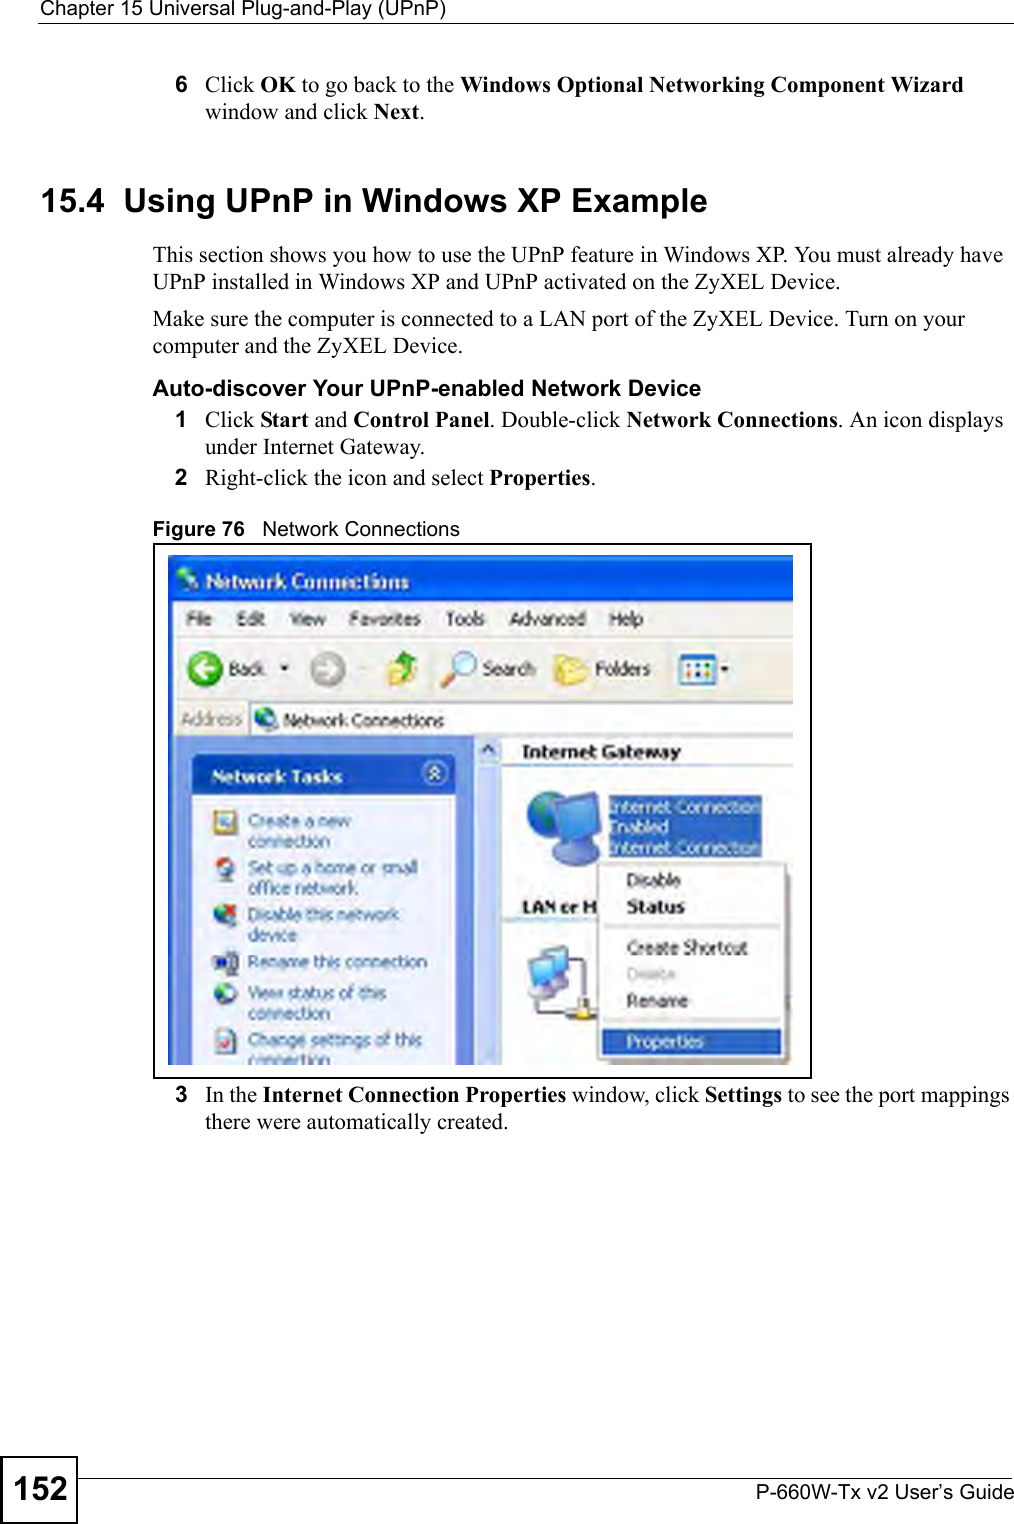 Chapter 15 Universal Plug-and-Play (UPnP)P-660W-Tx v2 User’s Guide1526Click OK to go back to the Windows Optional Networking Component Wizard window and click Next. 15.4  Using UPnP in Windows XP ExampleThis section shows you how to use the UPnP feature in Windows XP. You must already have UPnP installed in Windows XP and UPnP activated on the ZyXEL Device.Make sure the computer is connected to a LAN port of the ZyXEL Device. Turn on your computer and the ZyXEL Device. Auto-discover Your UPnP-enabled Network Device1Click Start and Control Panel. Double-click Network Connections. An icon displays under Internet Gateway.2Right-click the icon and select Properties. Figure 76   Network Connections3In the Internet Connection Properties window, click Settings to see the port mappings there were automatically created. 